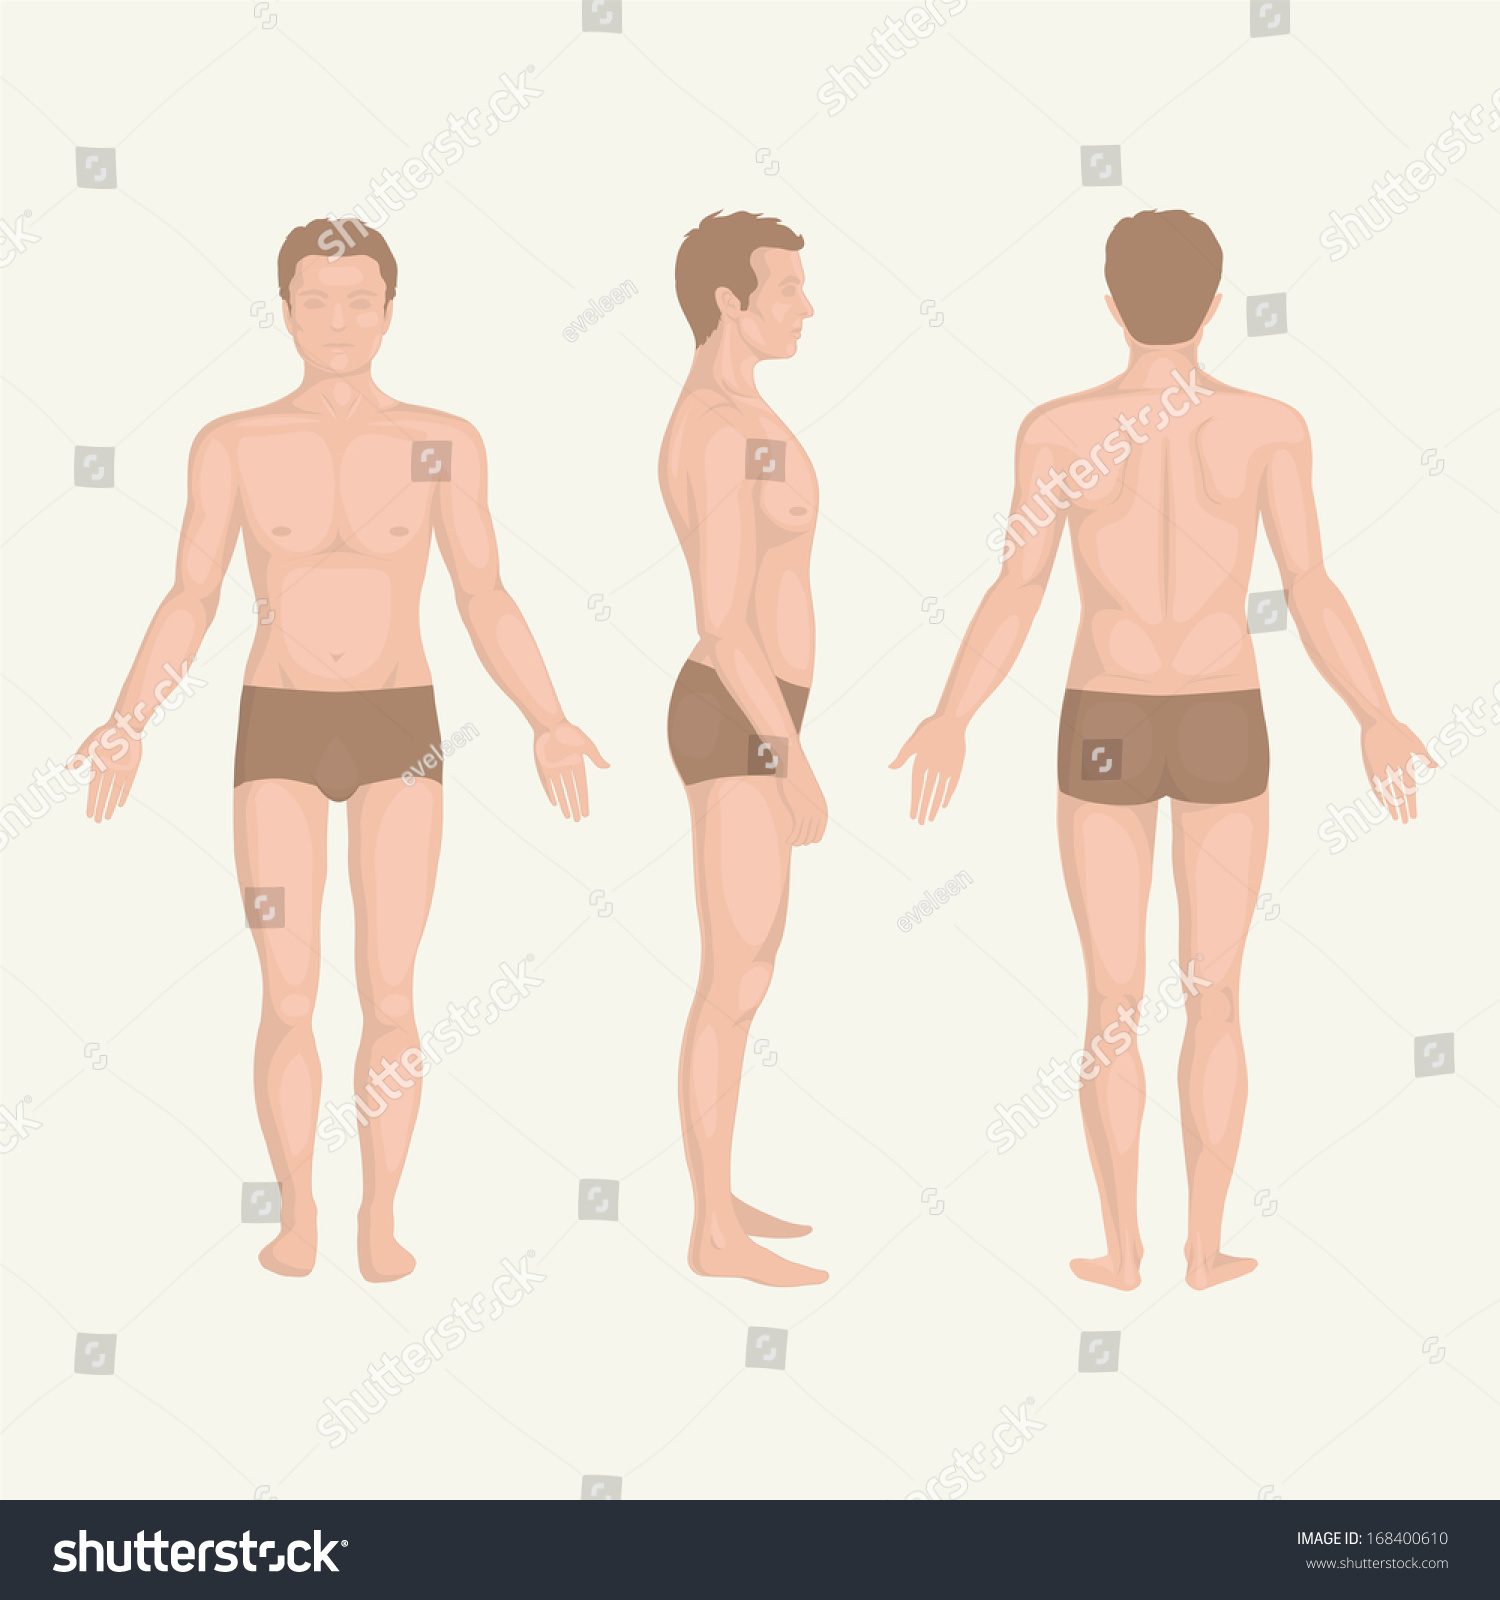 Images Of A Human Body Front And Back : Regions Of Female Body Female Body Front And Back Female Human Body Parts Human Anatomy Chart The Anatomical Names And Corresponding Common Names Are Indicated For Specific Body Regions Stock